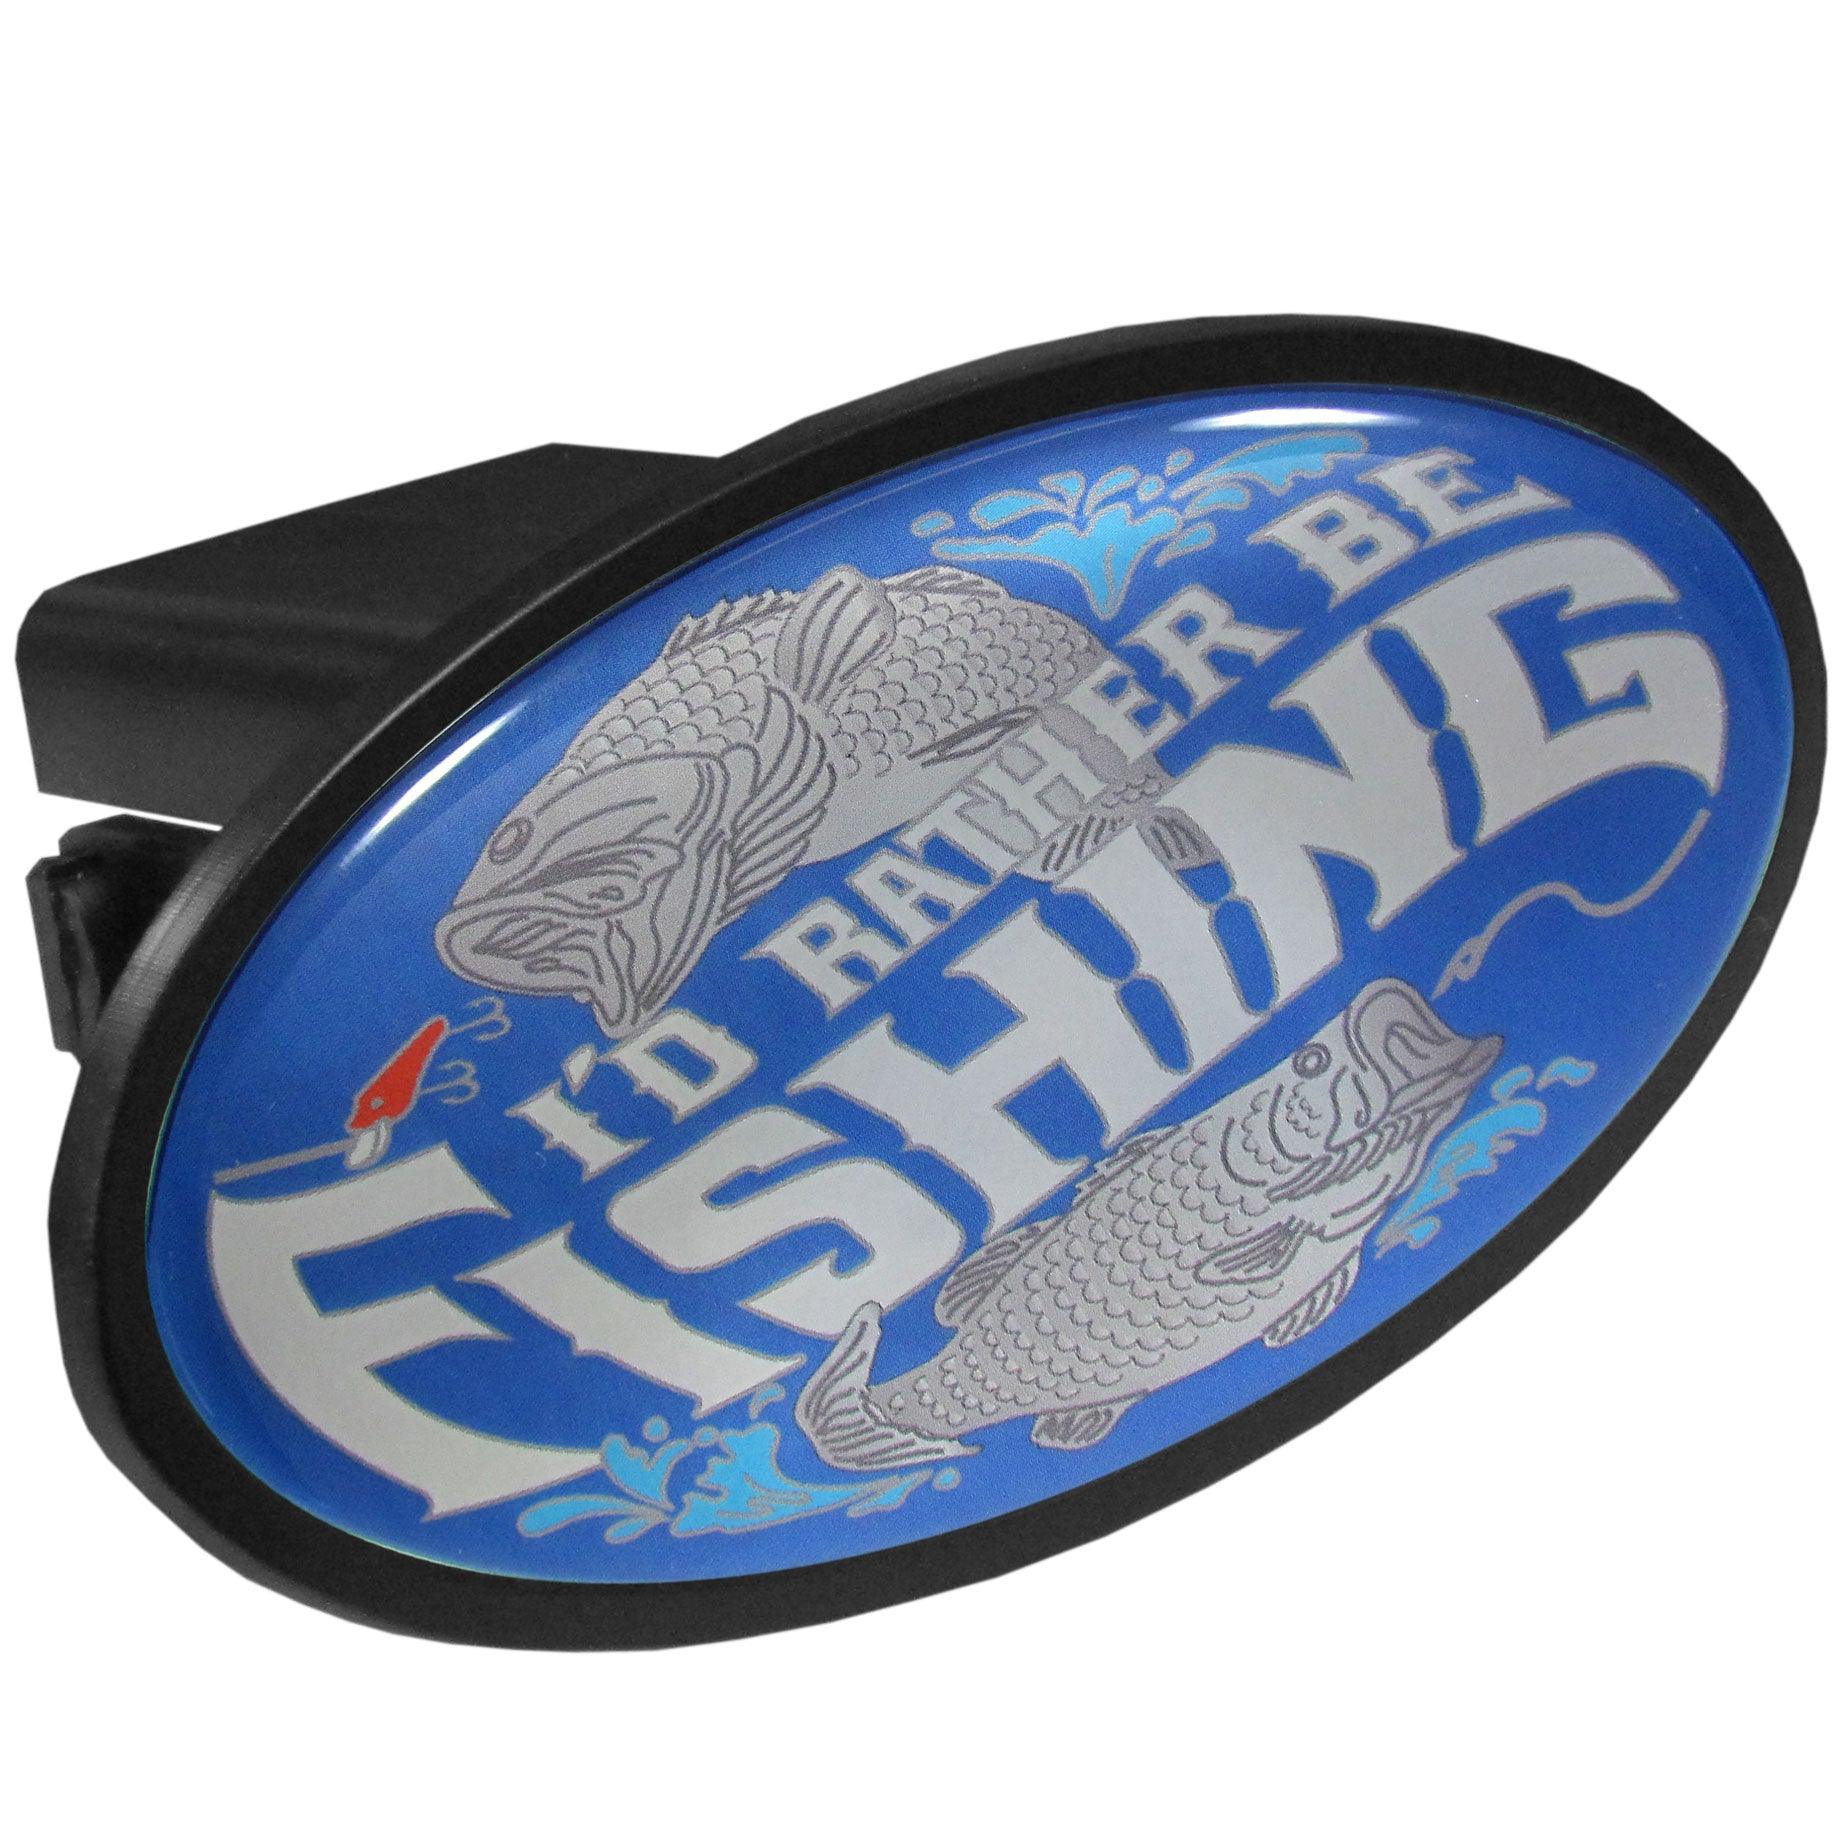 I'd Rather be Fishing Plastic Hitch Cover Class III - Flyclothing LLC